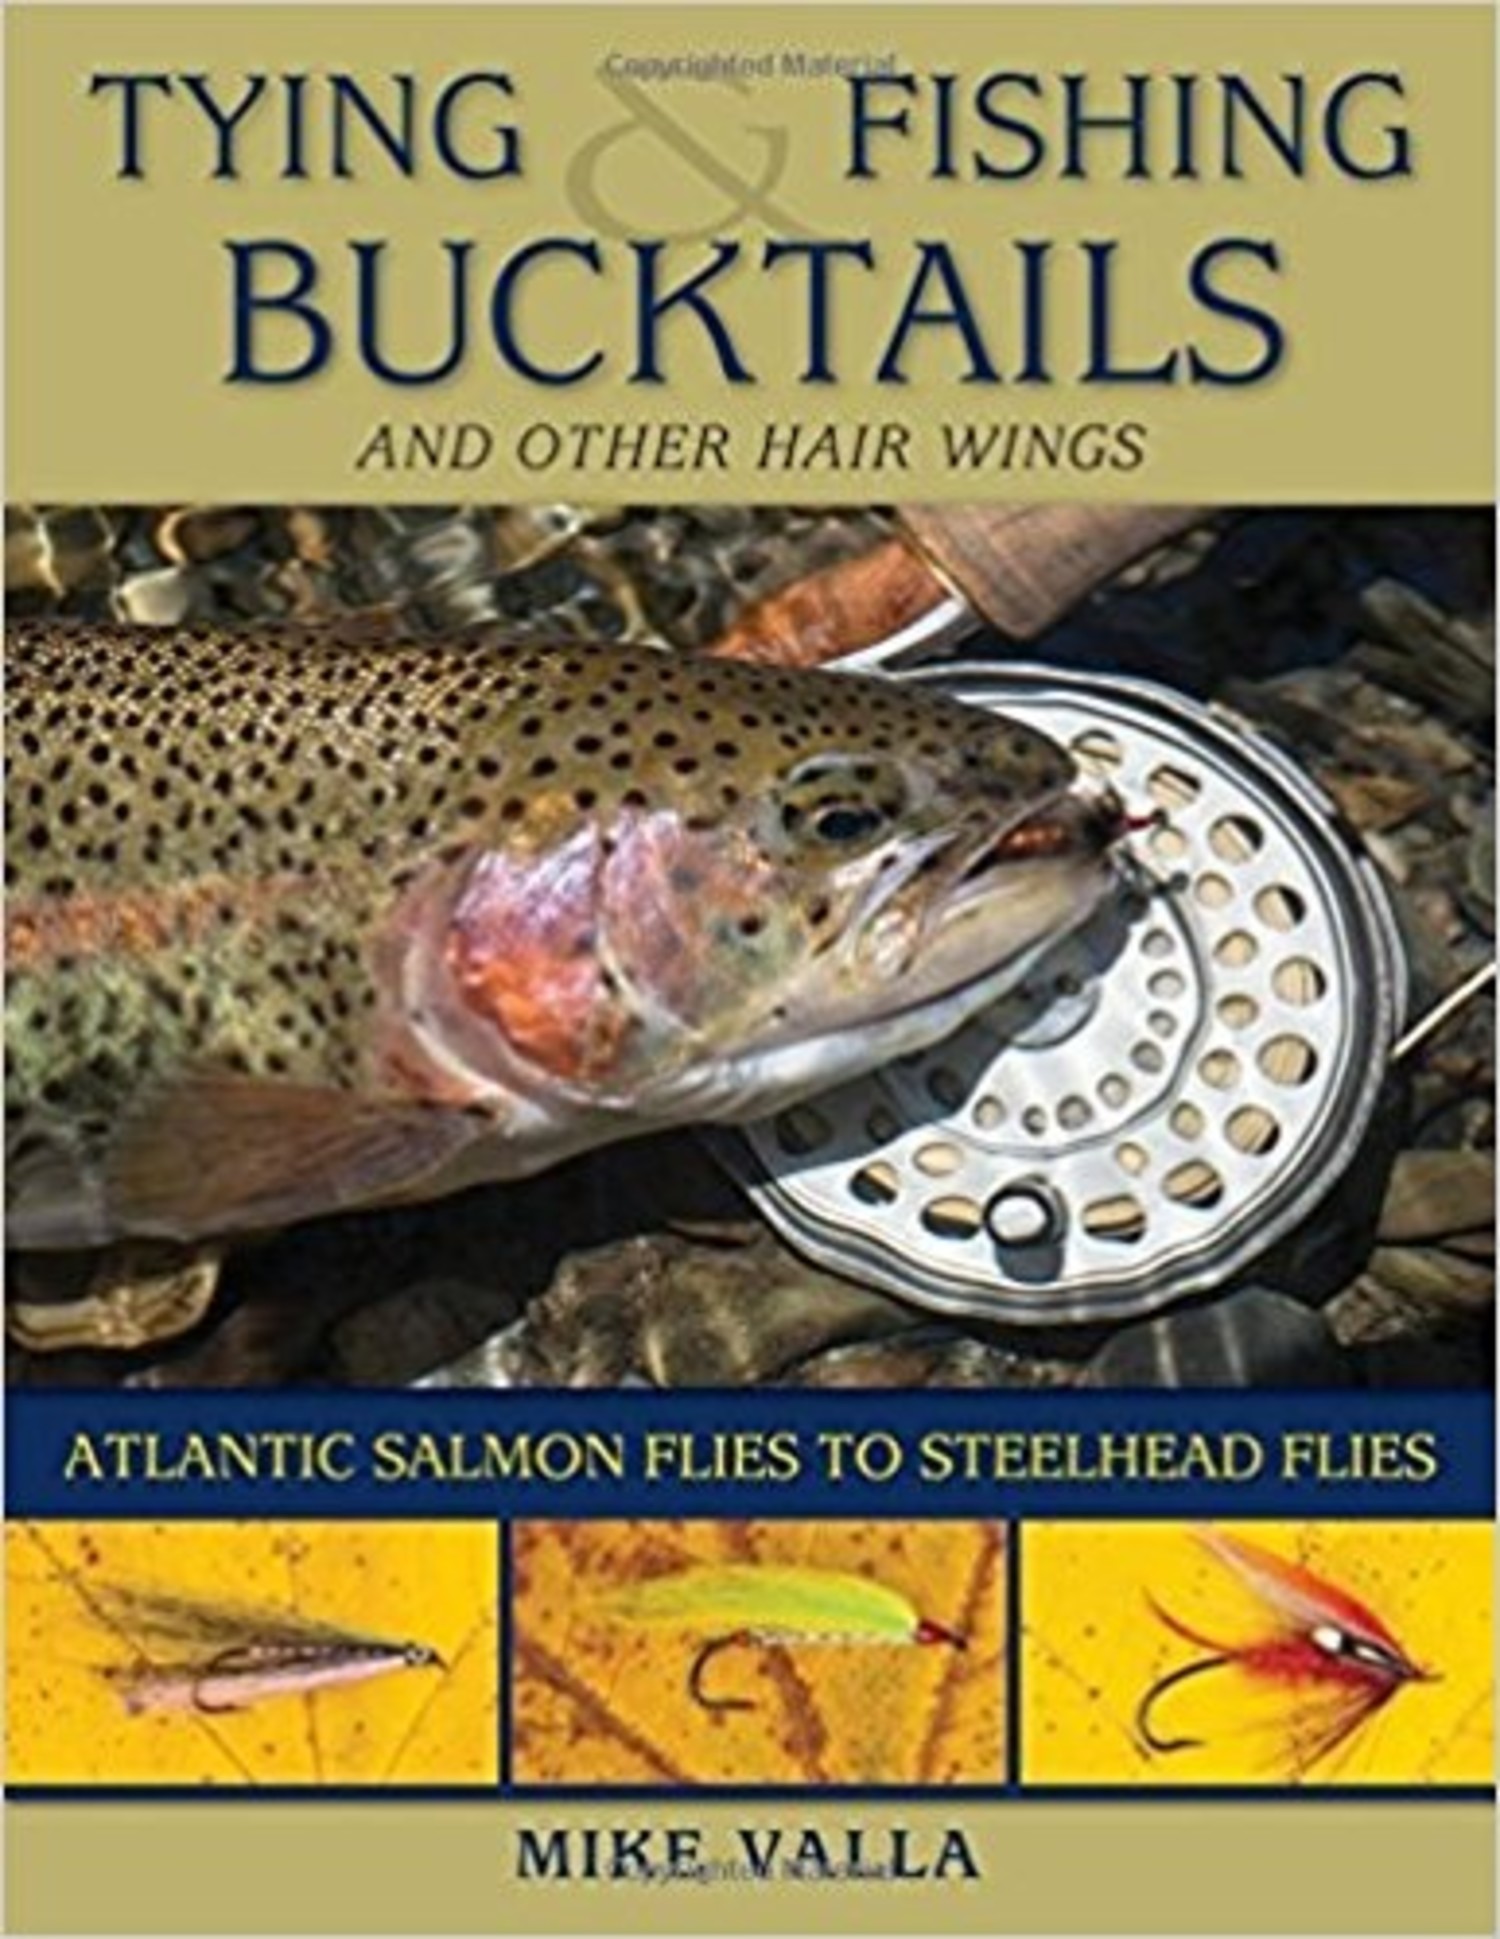 Anglers Books Tying and Fishing Bucktails and other Hair Wings